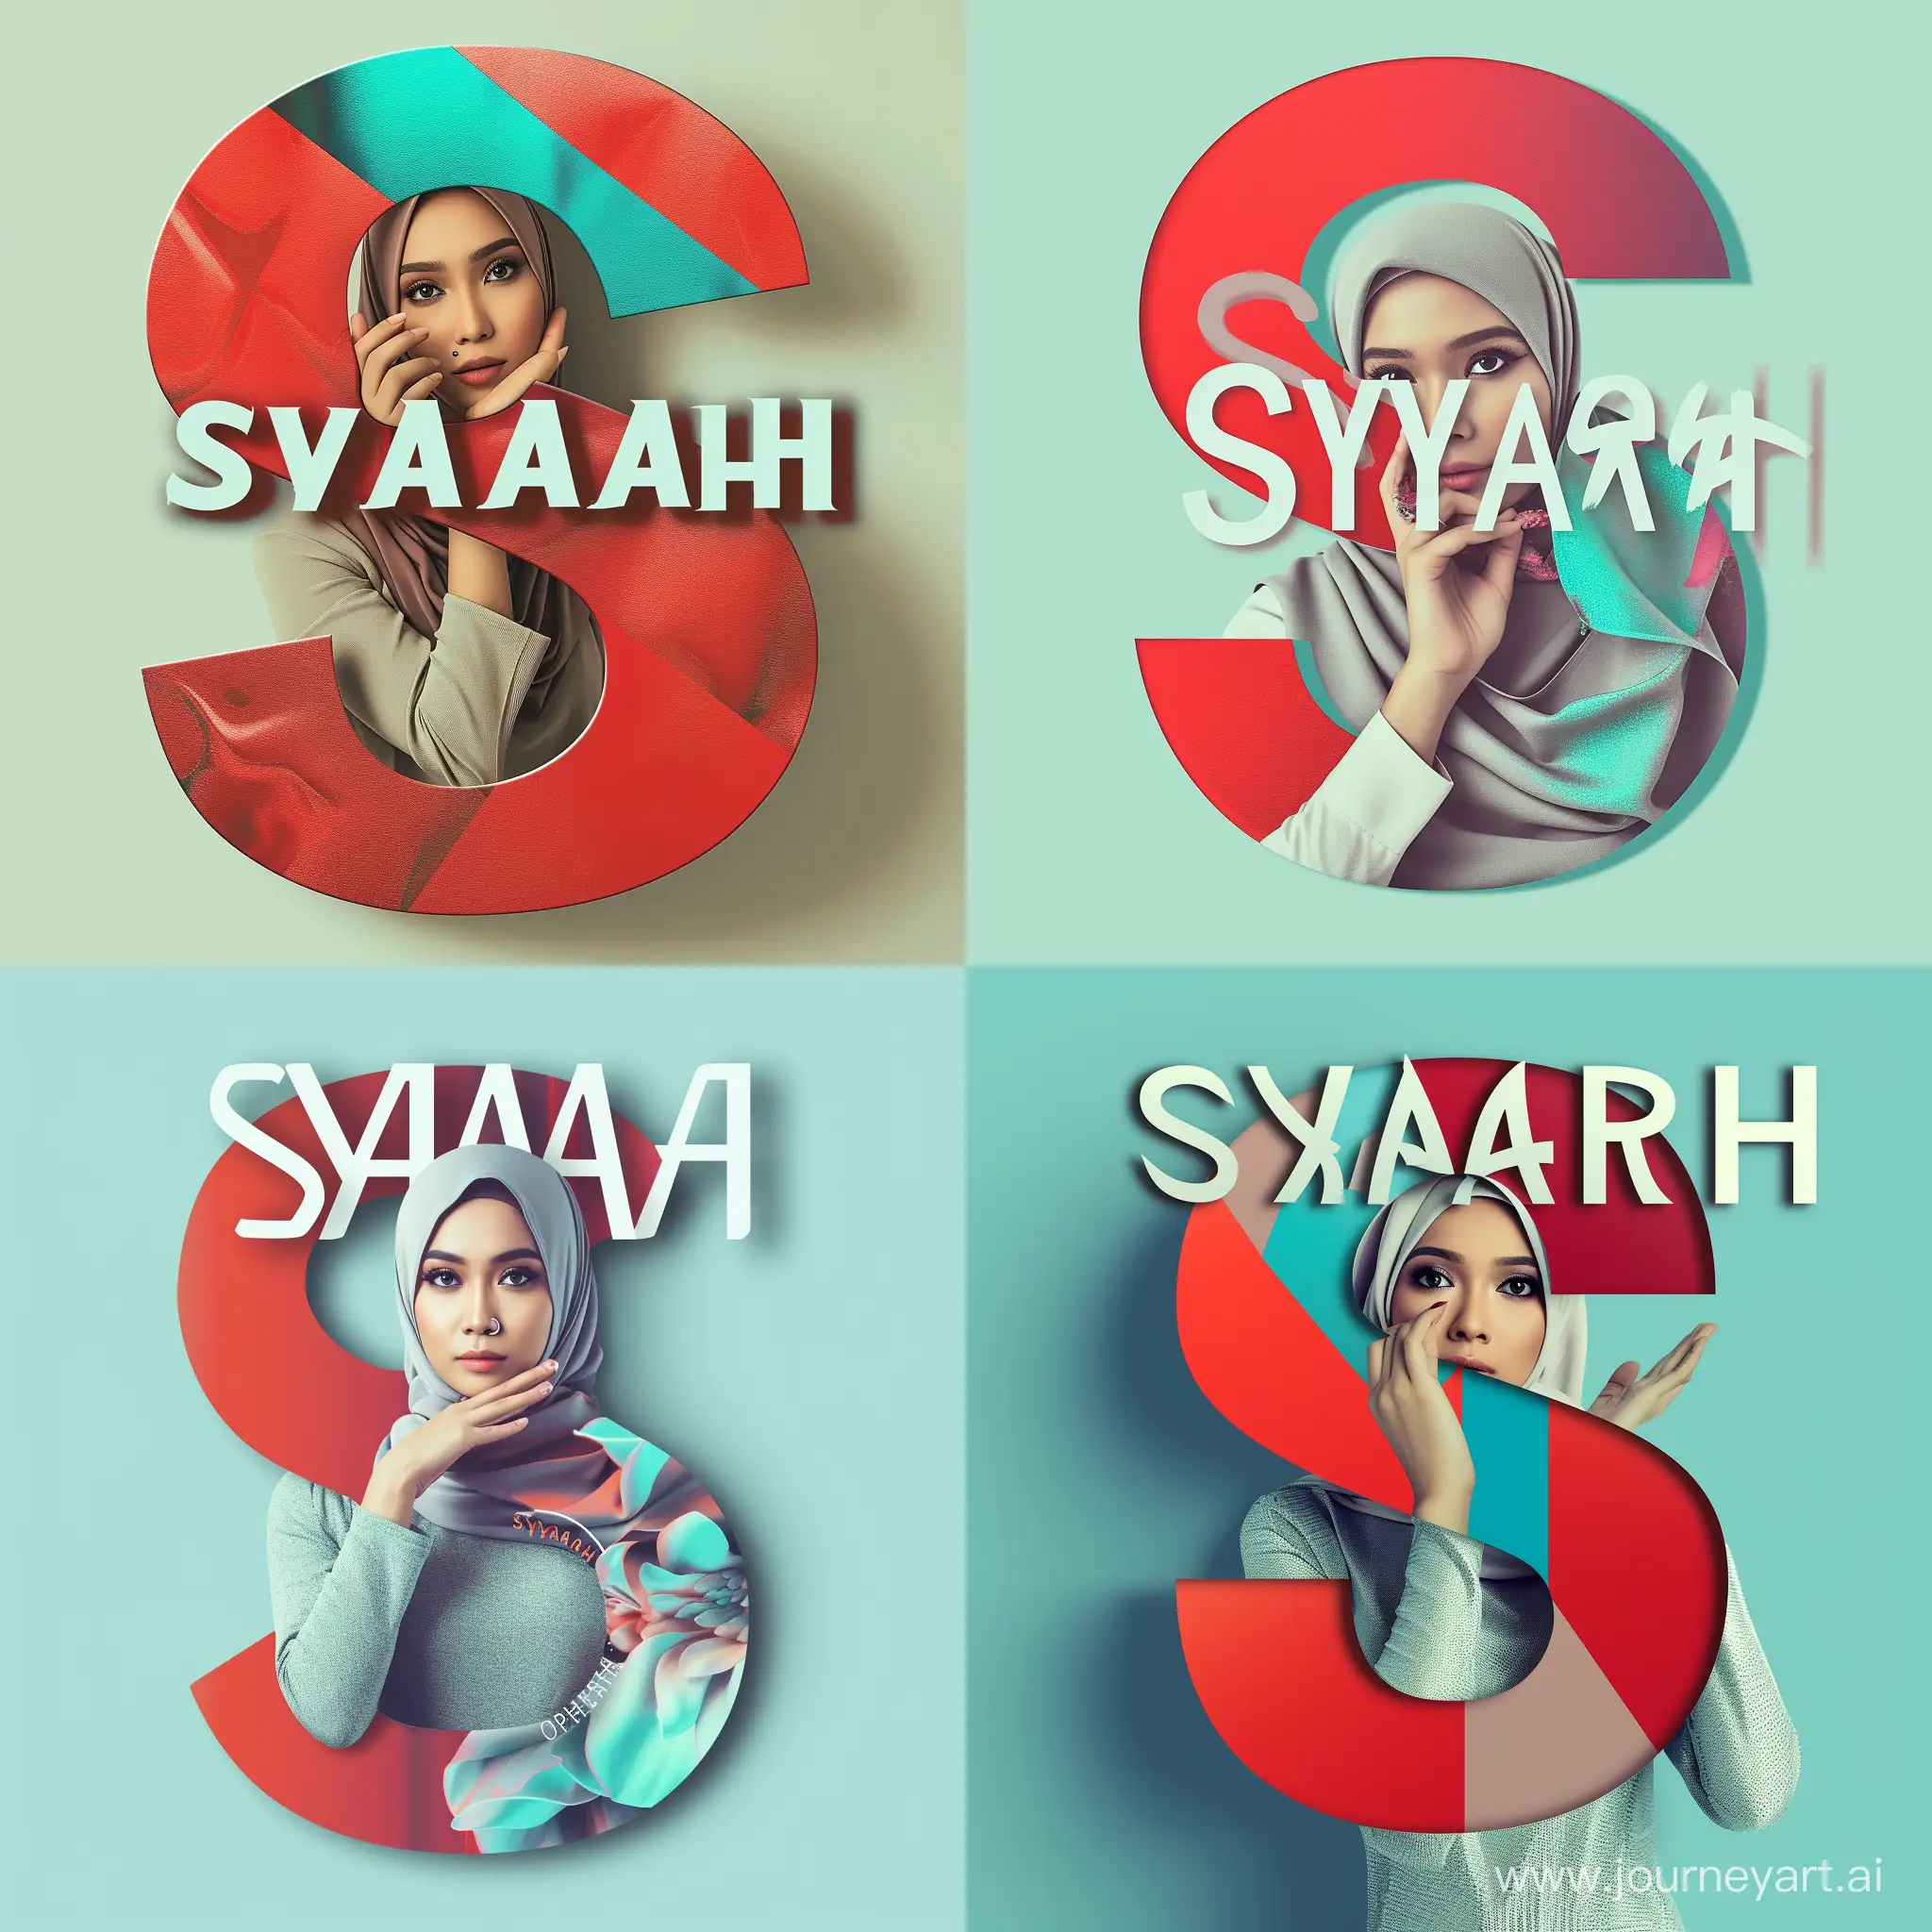 Collage style, Photo of captivating malay woman with hijab, cover the entire surface of the letter, (The head and palm on nose, emerges from the center of the "S"), popup, with the elegant text "SYARAH" on midst, thick, sans-serif font, orchid, red, blue, white, and turqoise, background soft color, giving an iridescent appearance, striking pose, shimmering, vibrant, great composition